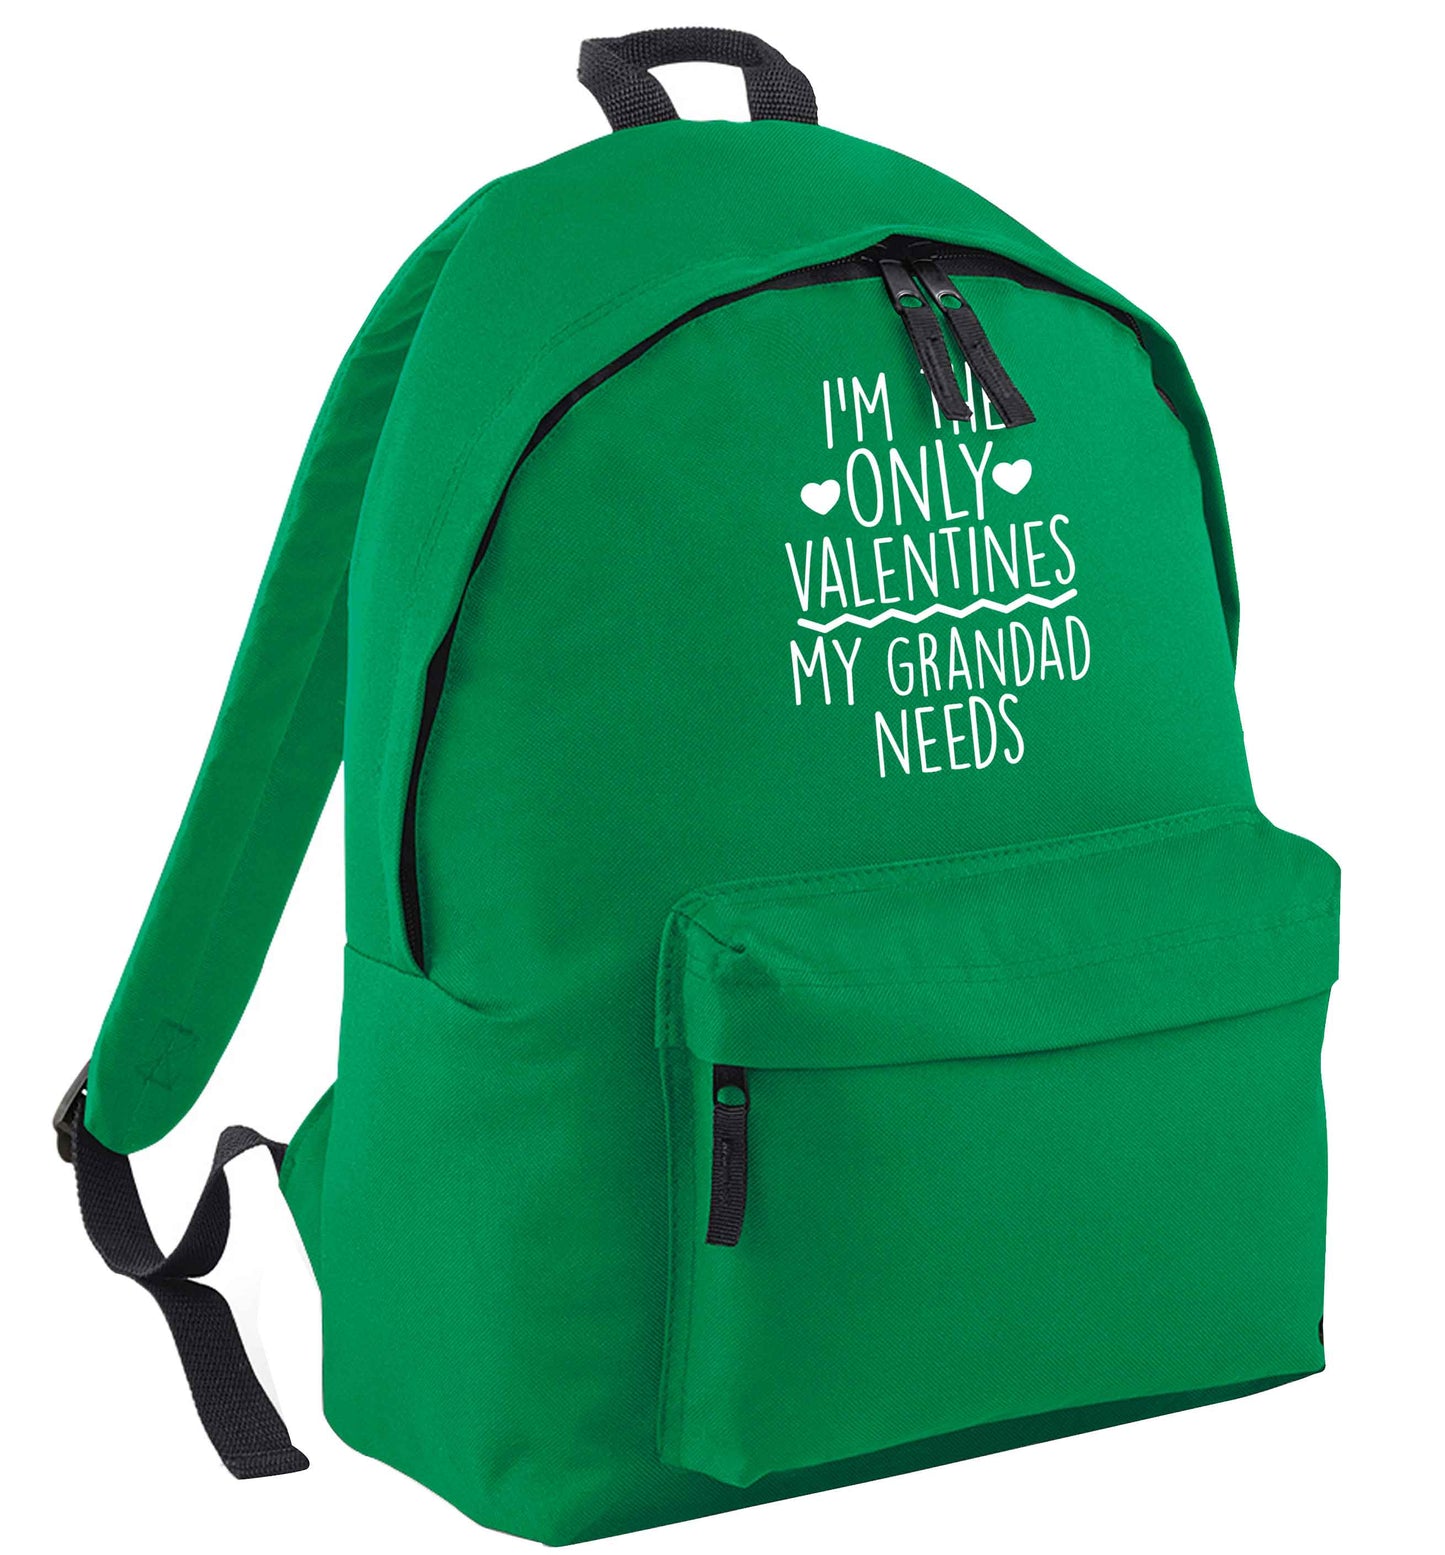 I'm the only valentines my grandad needs green adults backpack